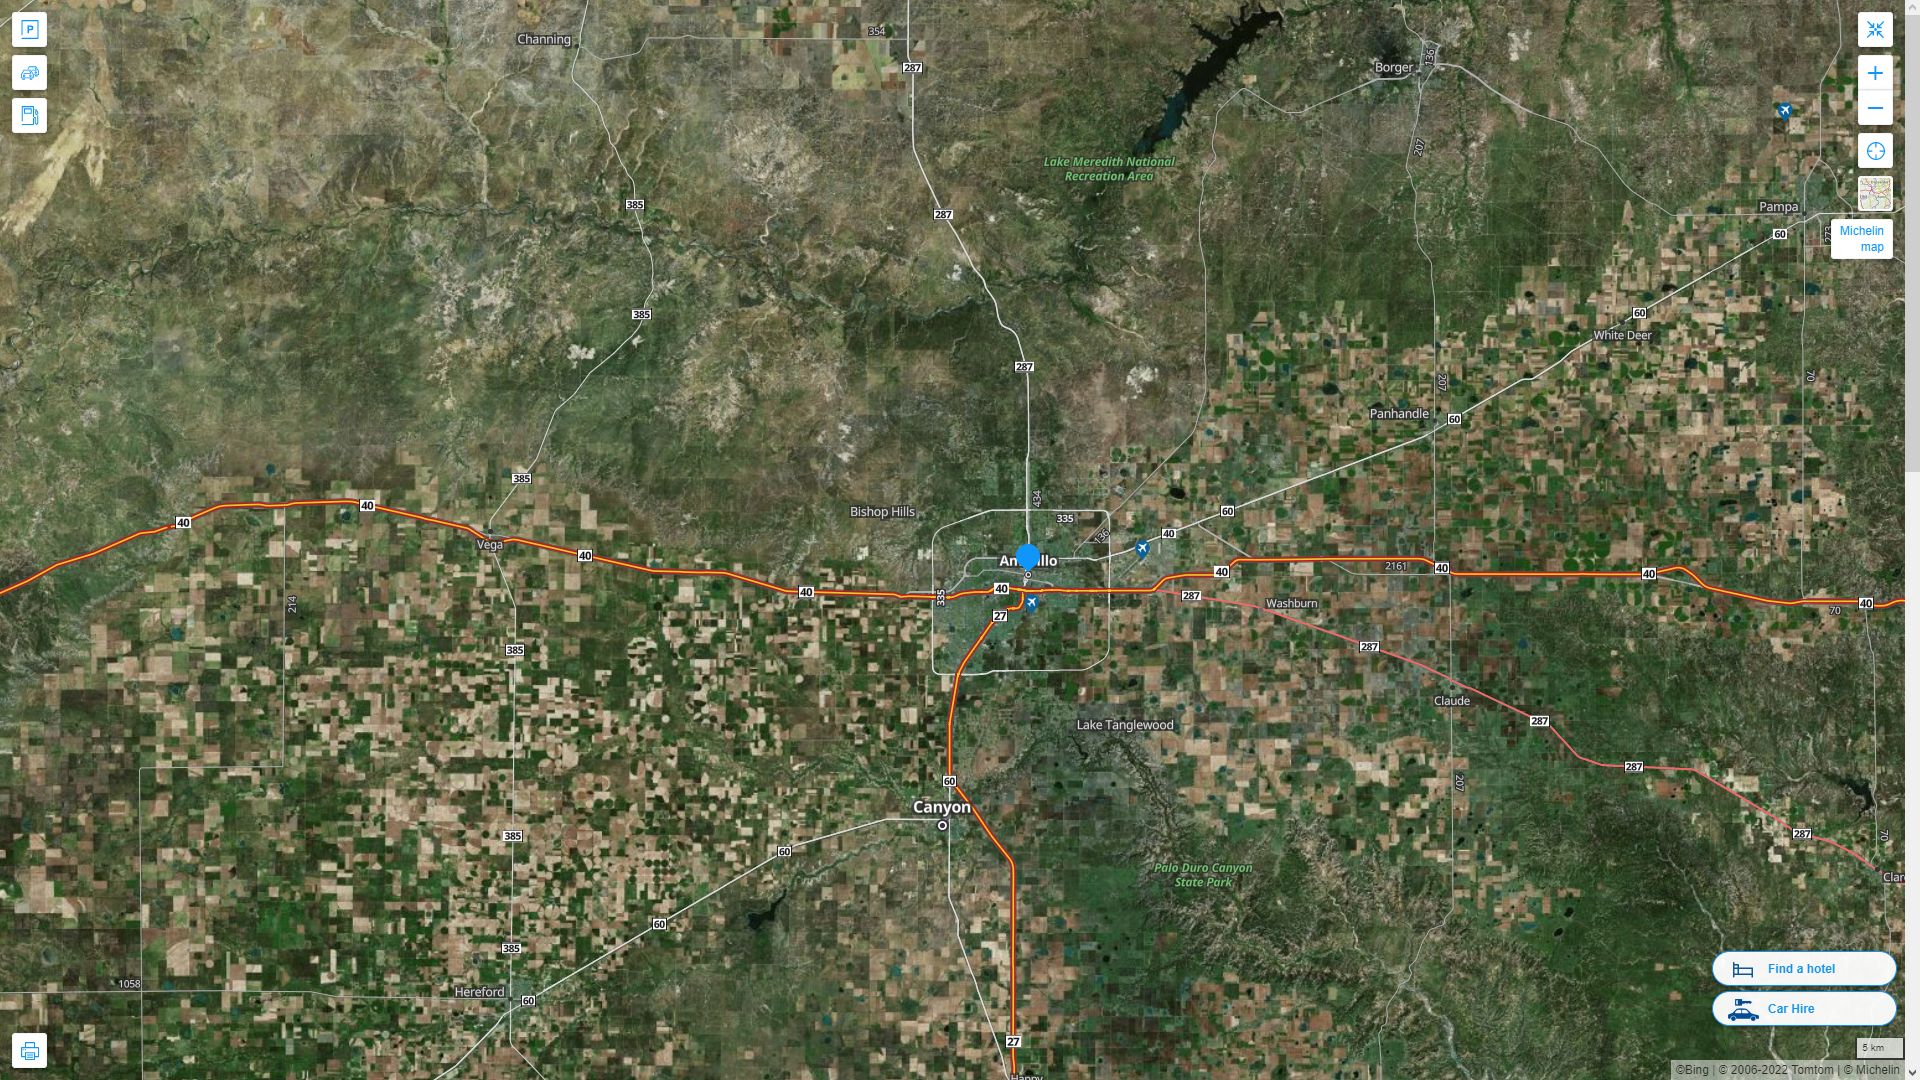 Amarillo Texas Highway and Road Map with Satellite View